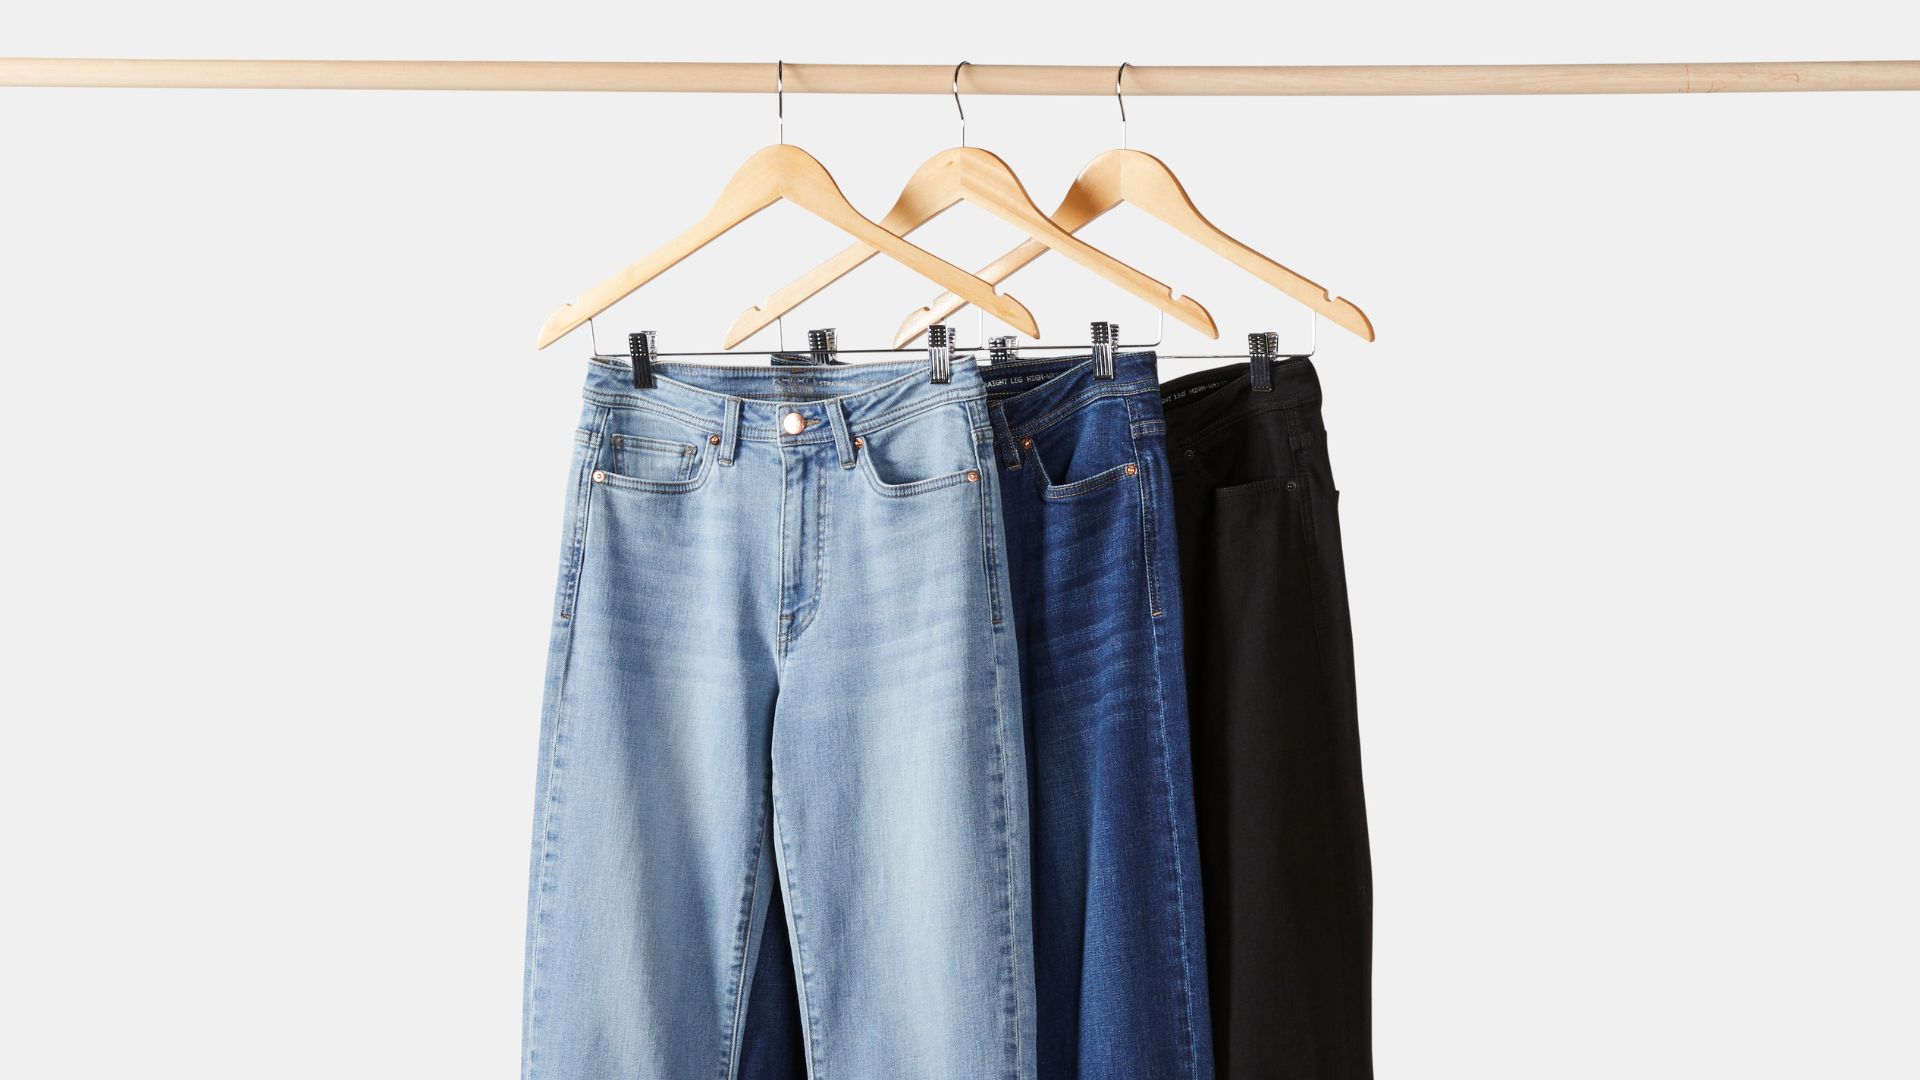 The Ultimate Guide: How To Build A Minimalist Capsule Wardrobe